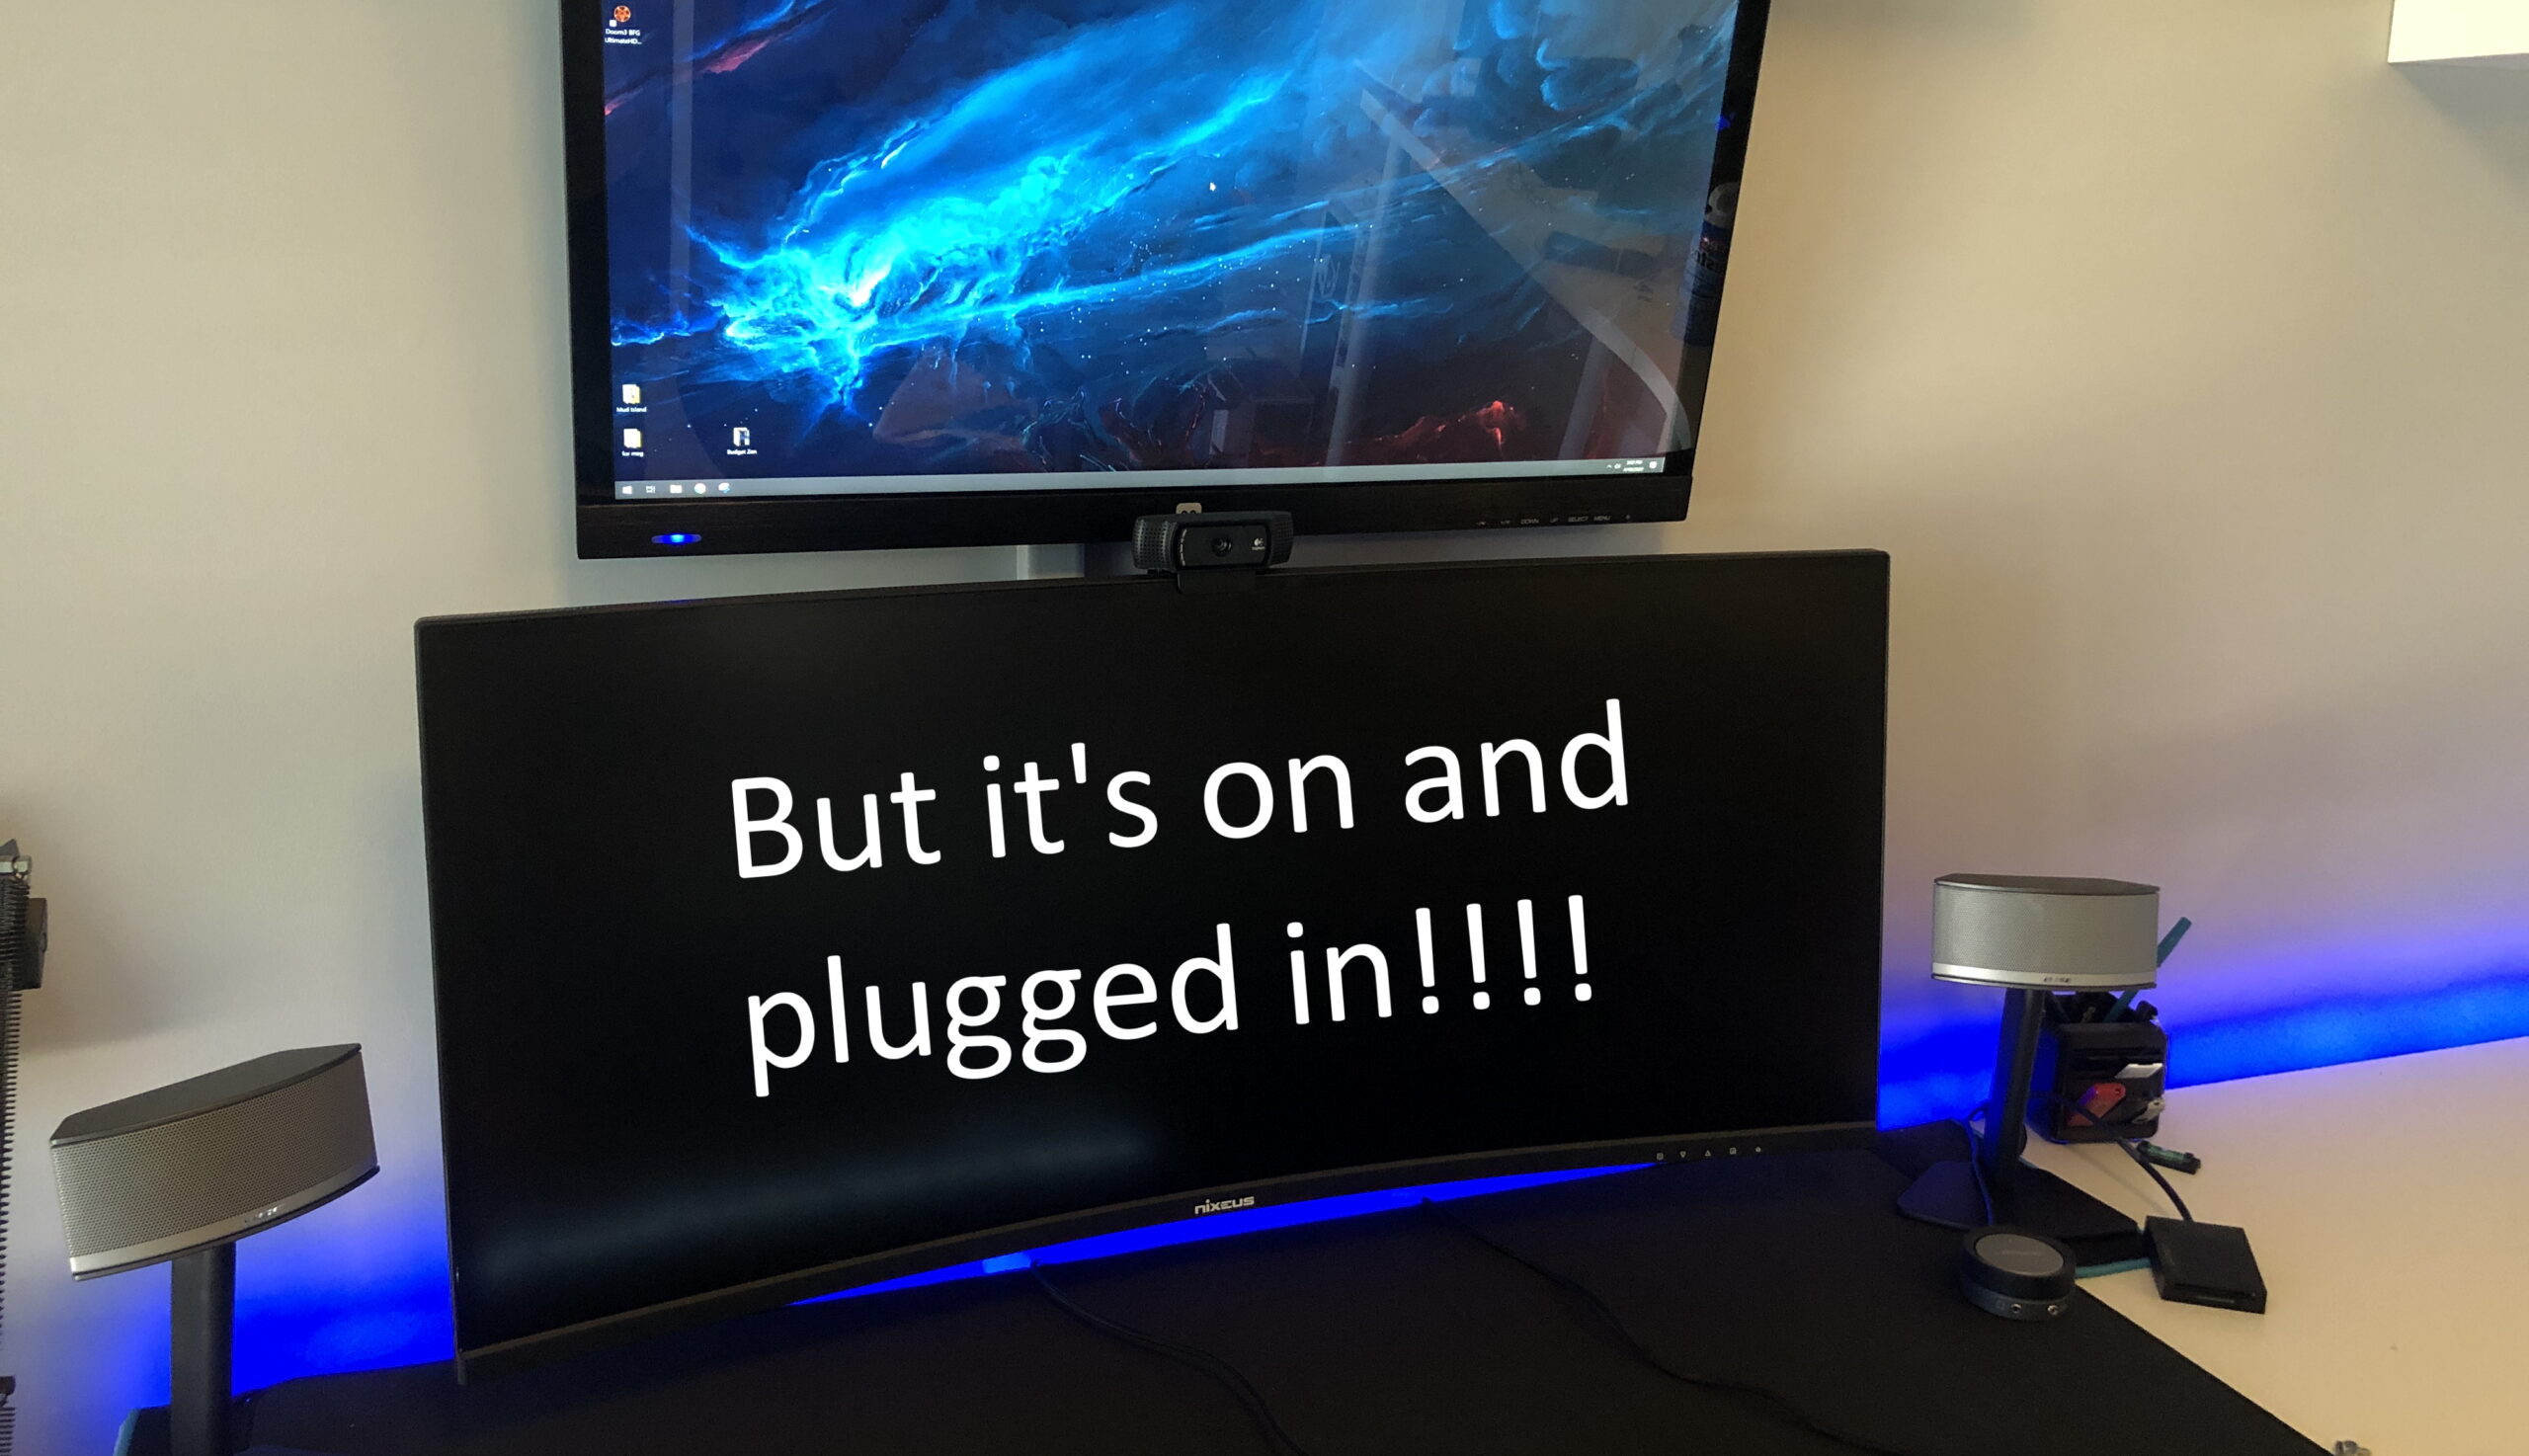 Update monitor firmware if available.
Try a different cable or port for connecting the monitor.